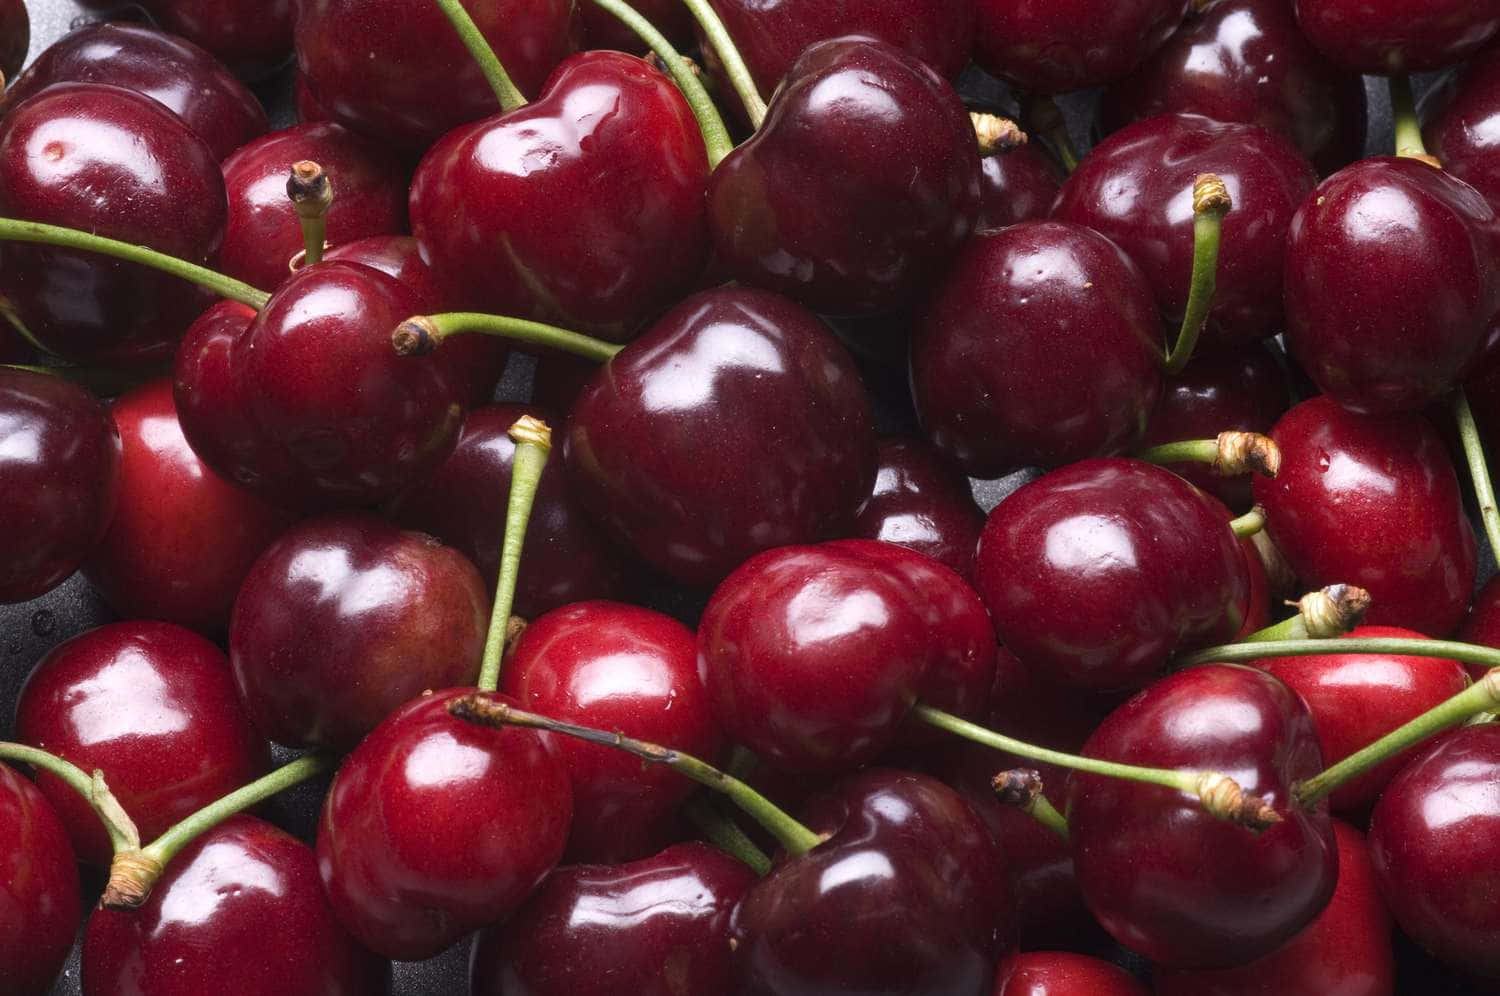 A close-up image of freshly picked red cherries Wallpaper